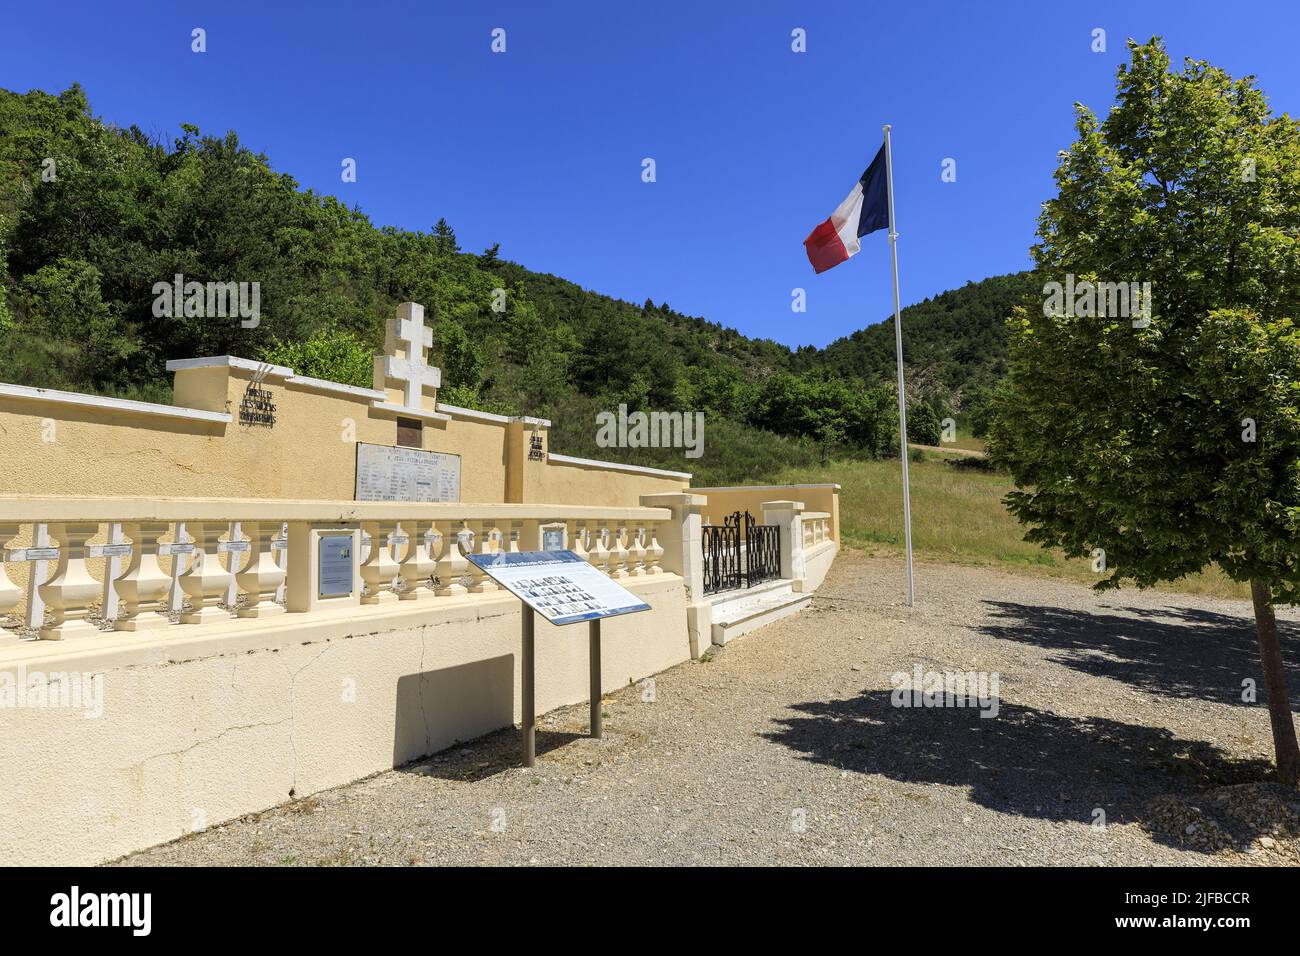 France, Drome, regional natural park of the Baronnies provençales, Eygalayes, National cemetery regrouping 35 tombs of the guerrillas of Ventoux fusilles on February 22, 1944 Stock Photo